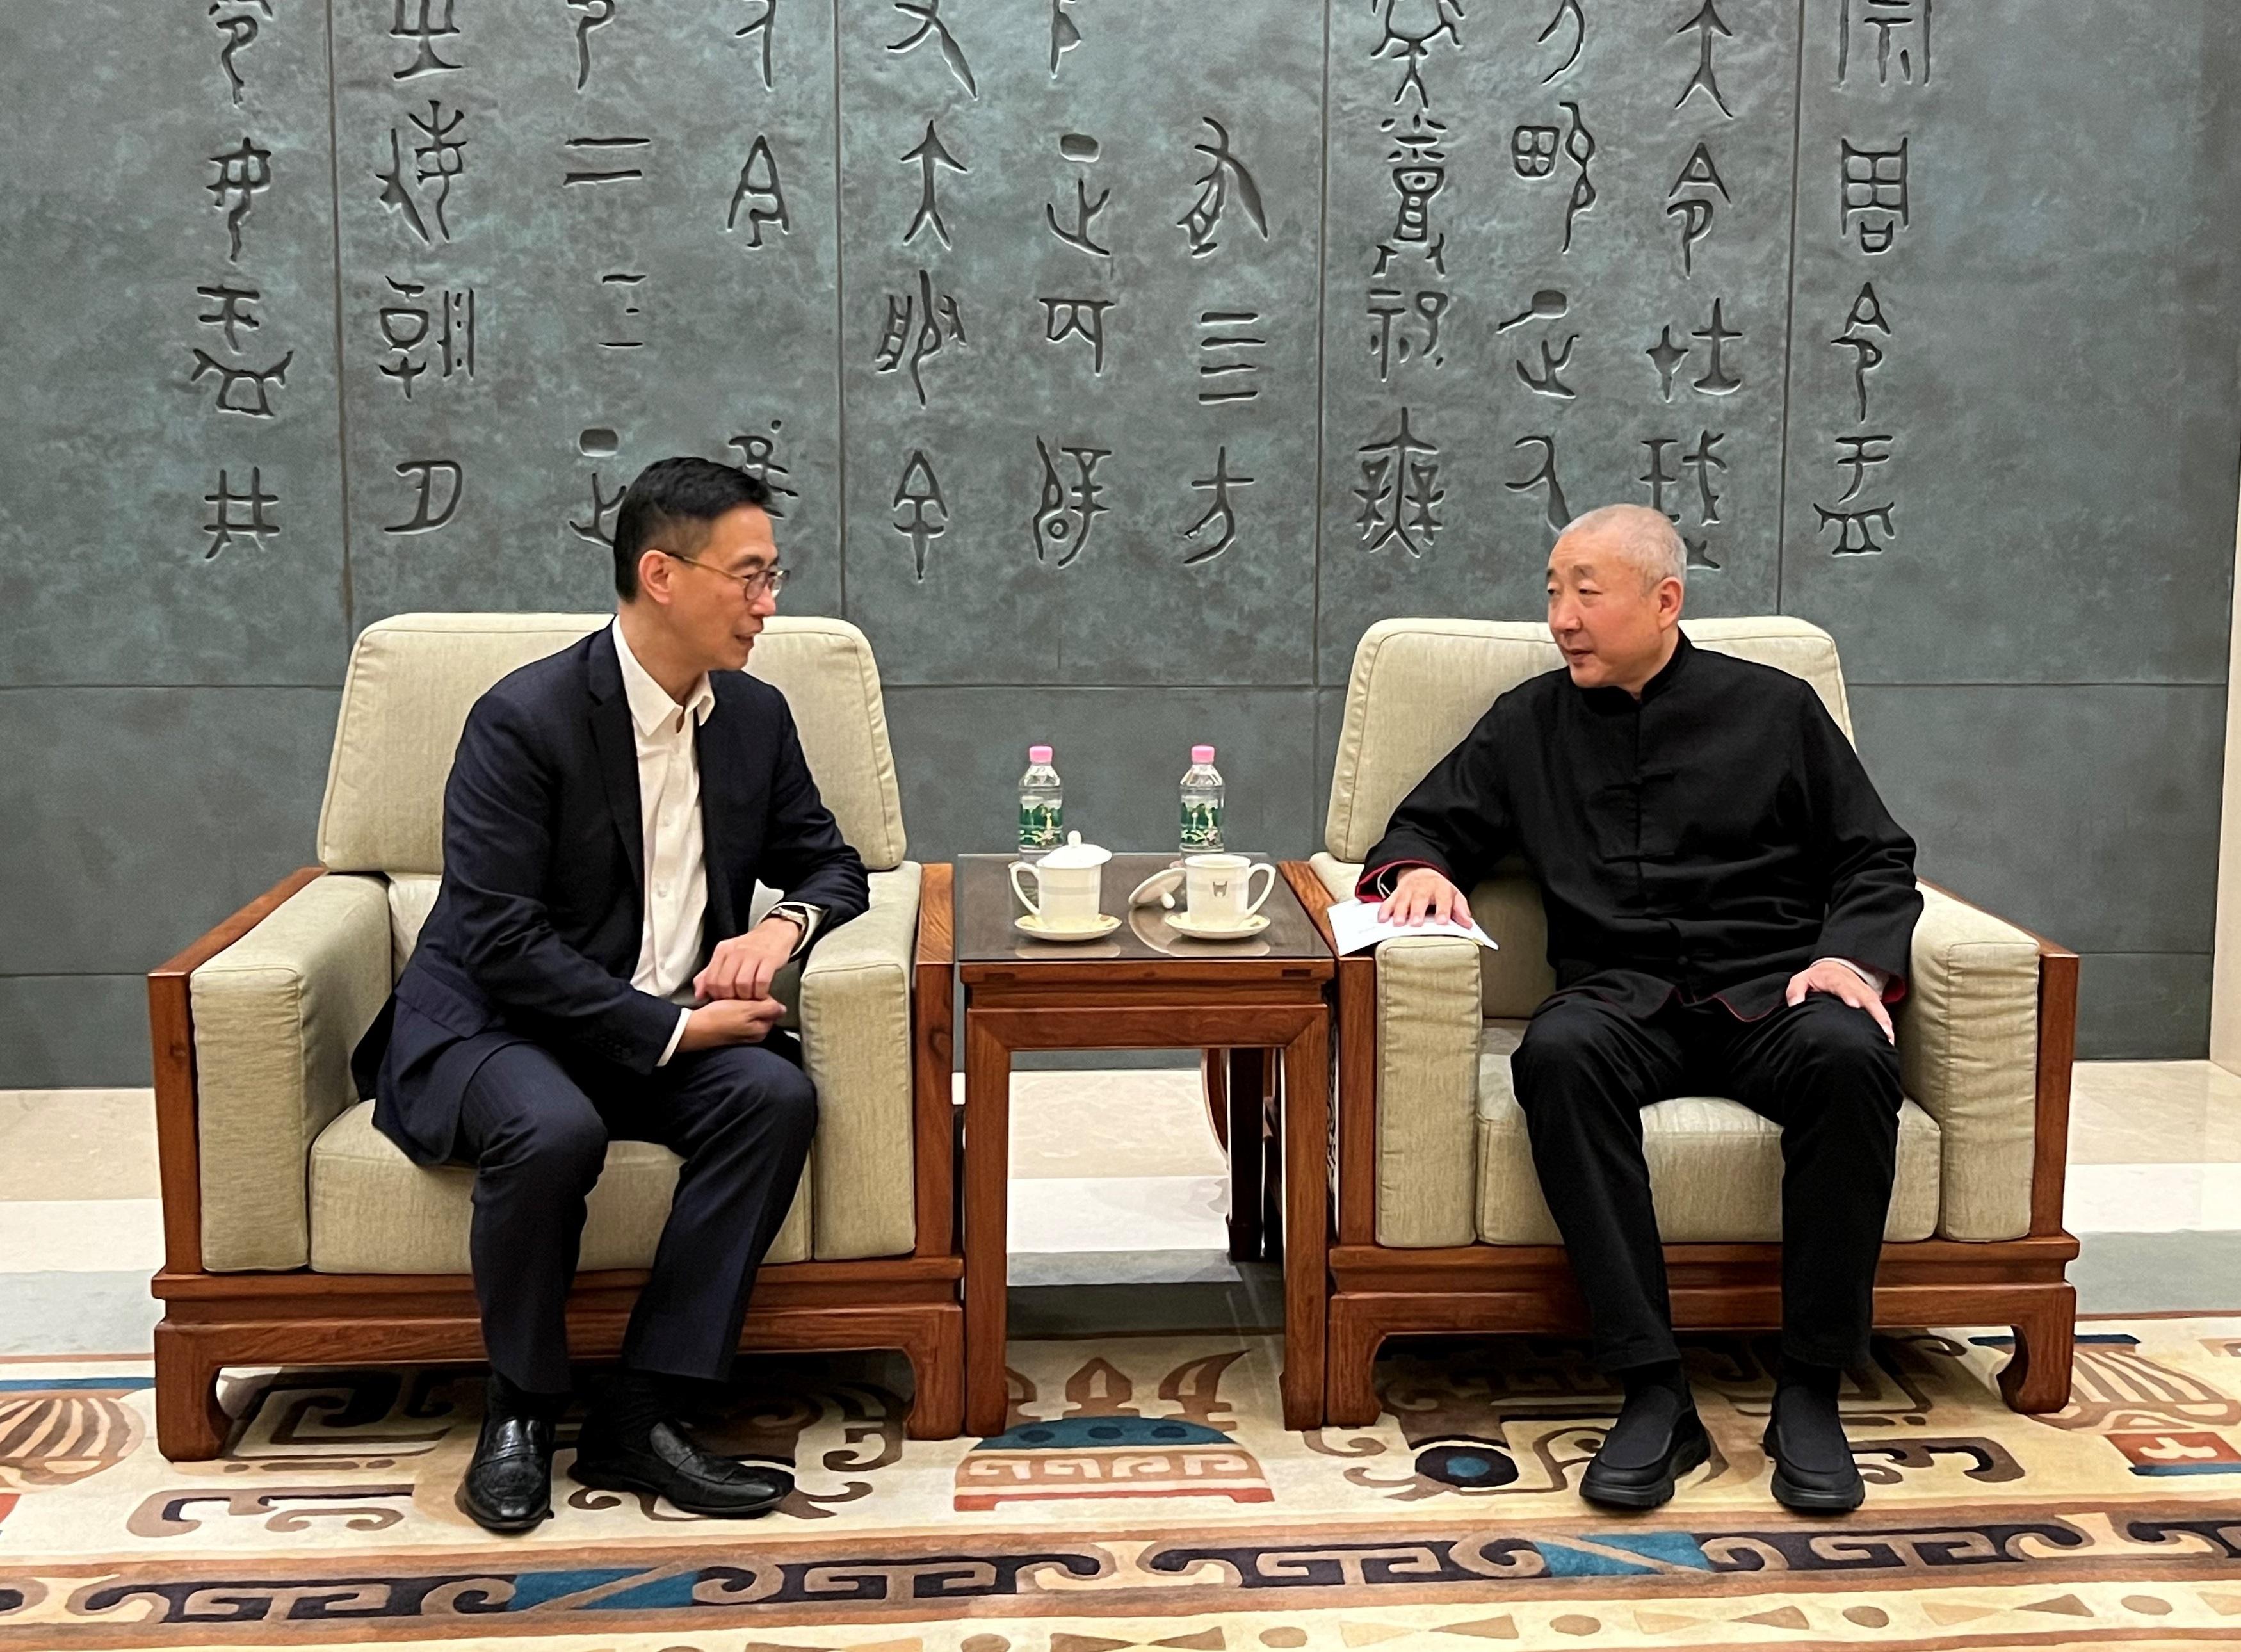 The Secretary for Culture, Sports and Tourism, Mr Kevin Yeung (left), this afternoon (May 10) met with the Director General of the International Exchange and Cooperation Bureau of the Ministry of Culture and Tourism and Director of the National Museum of China, Mr Gao Zheng (right), to exchange views.